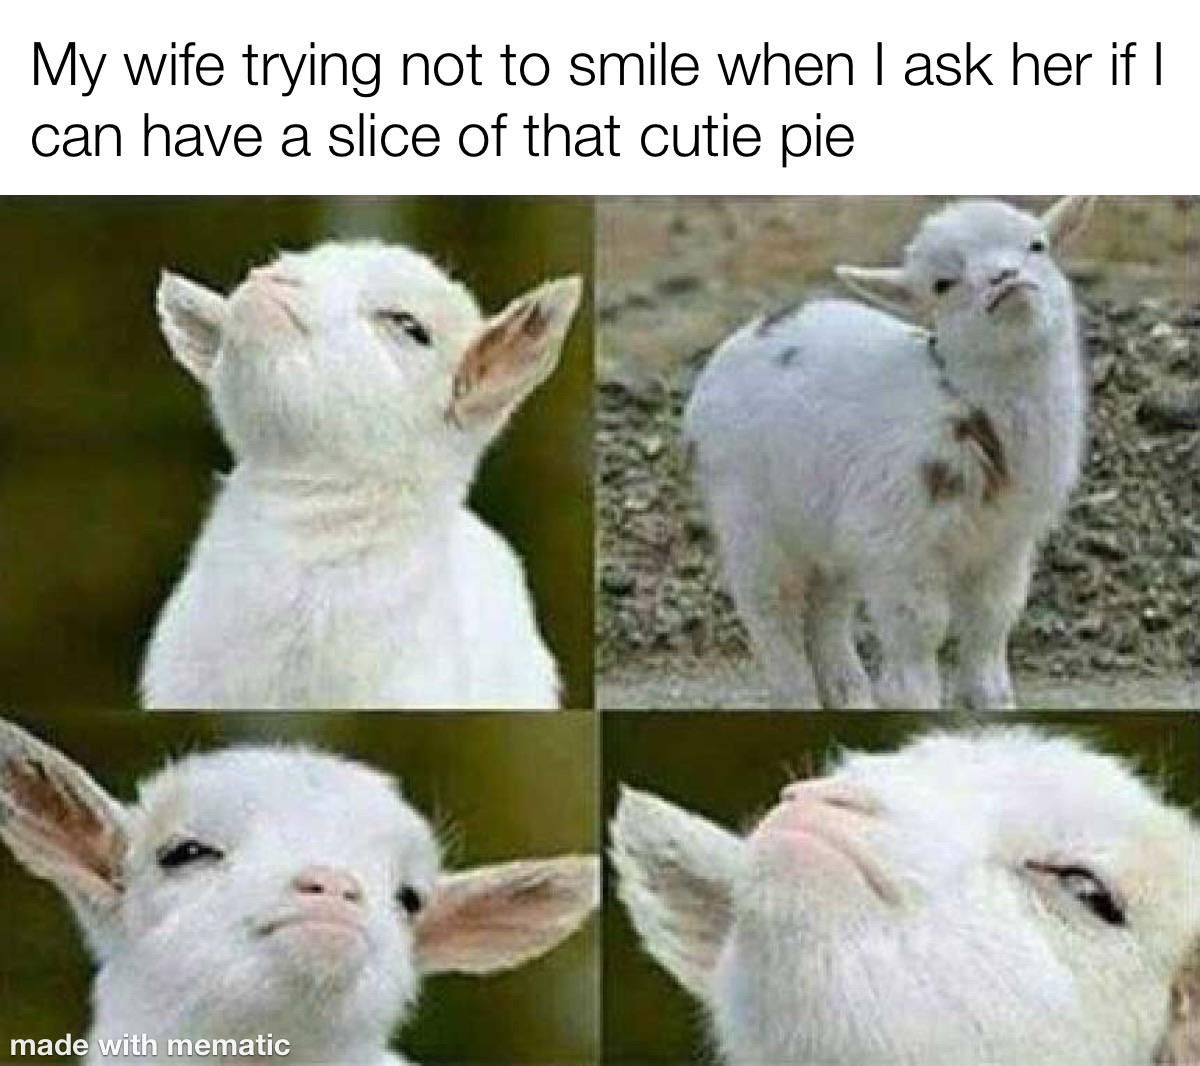 Wholesome memes, Husband, PissYourTits, Honey, Bear, Anglo-Indian Wholesome Memes Wholesome memes, Husband, PissYourTits, Honey, Bear, Anglo-Indian text: My wife trying not to smile when I ask her if I can have a slice of that cutie pie made ith mematic 